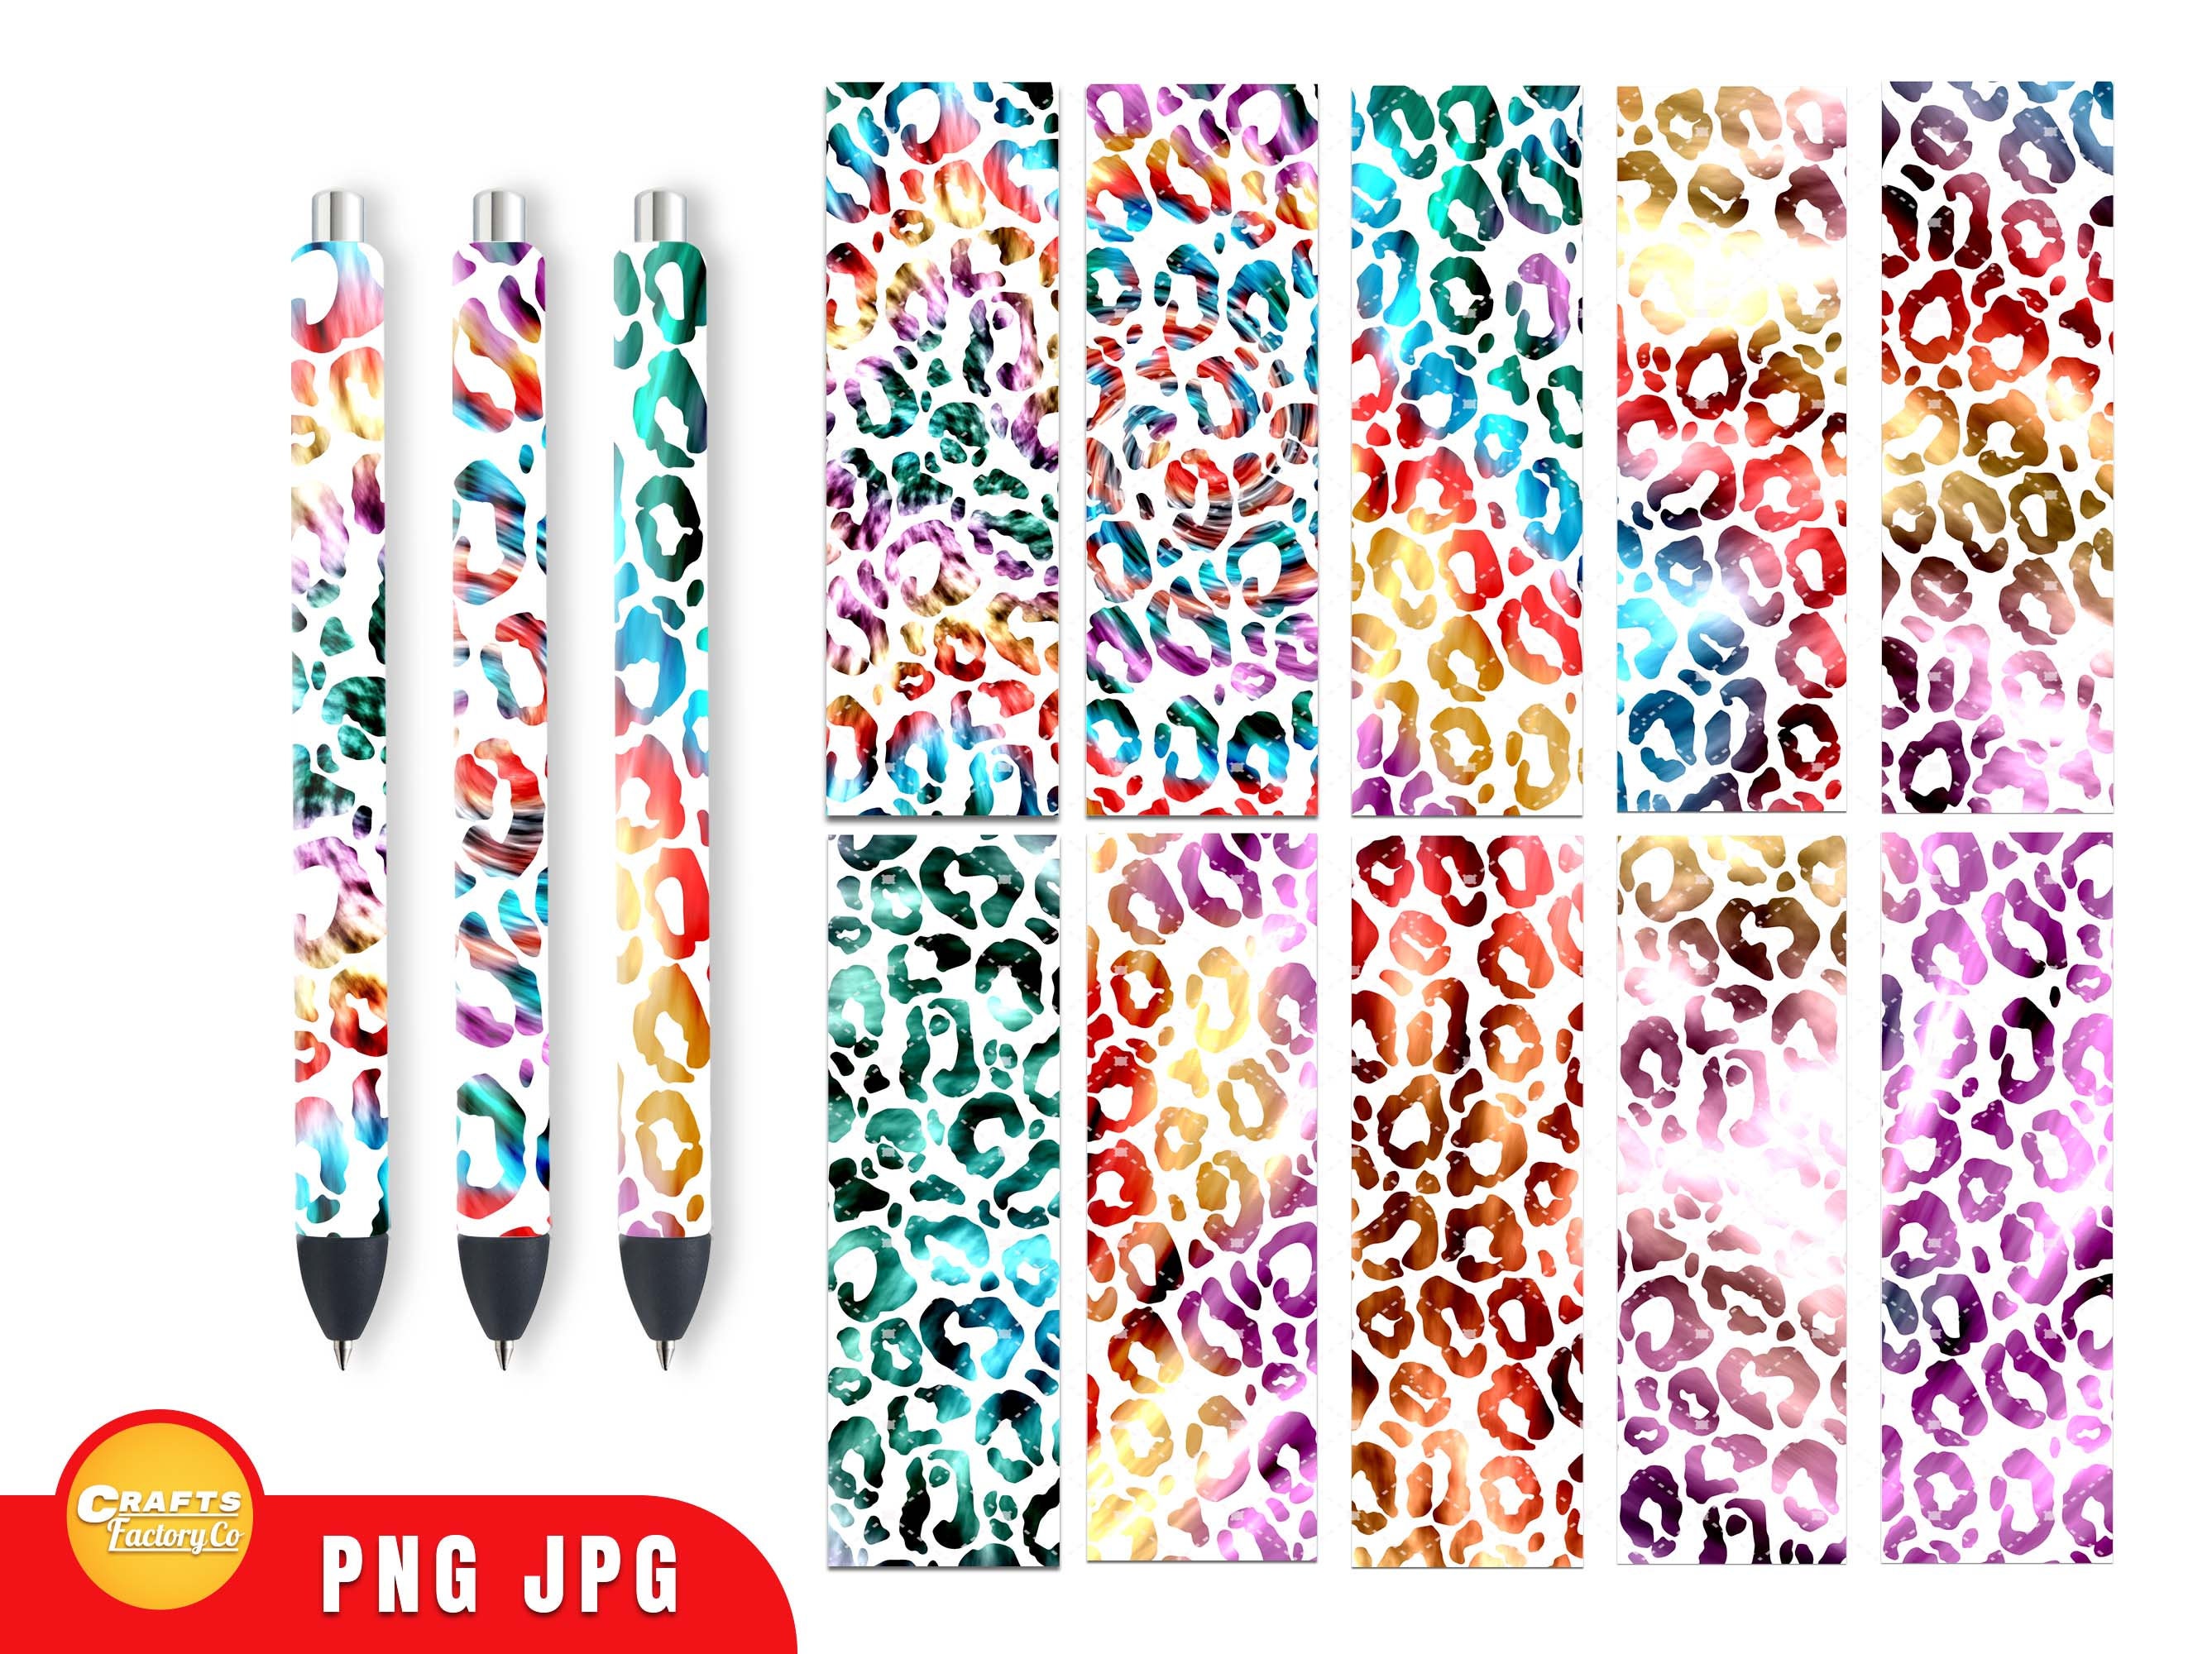 4 PNG Files on individual and on full sheet 300 DPI Pen Wrap Tie Dyed Leopards patterns Metallic Pen Wrap waterslide epoxy pen wraps